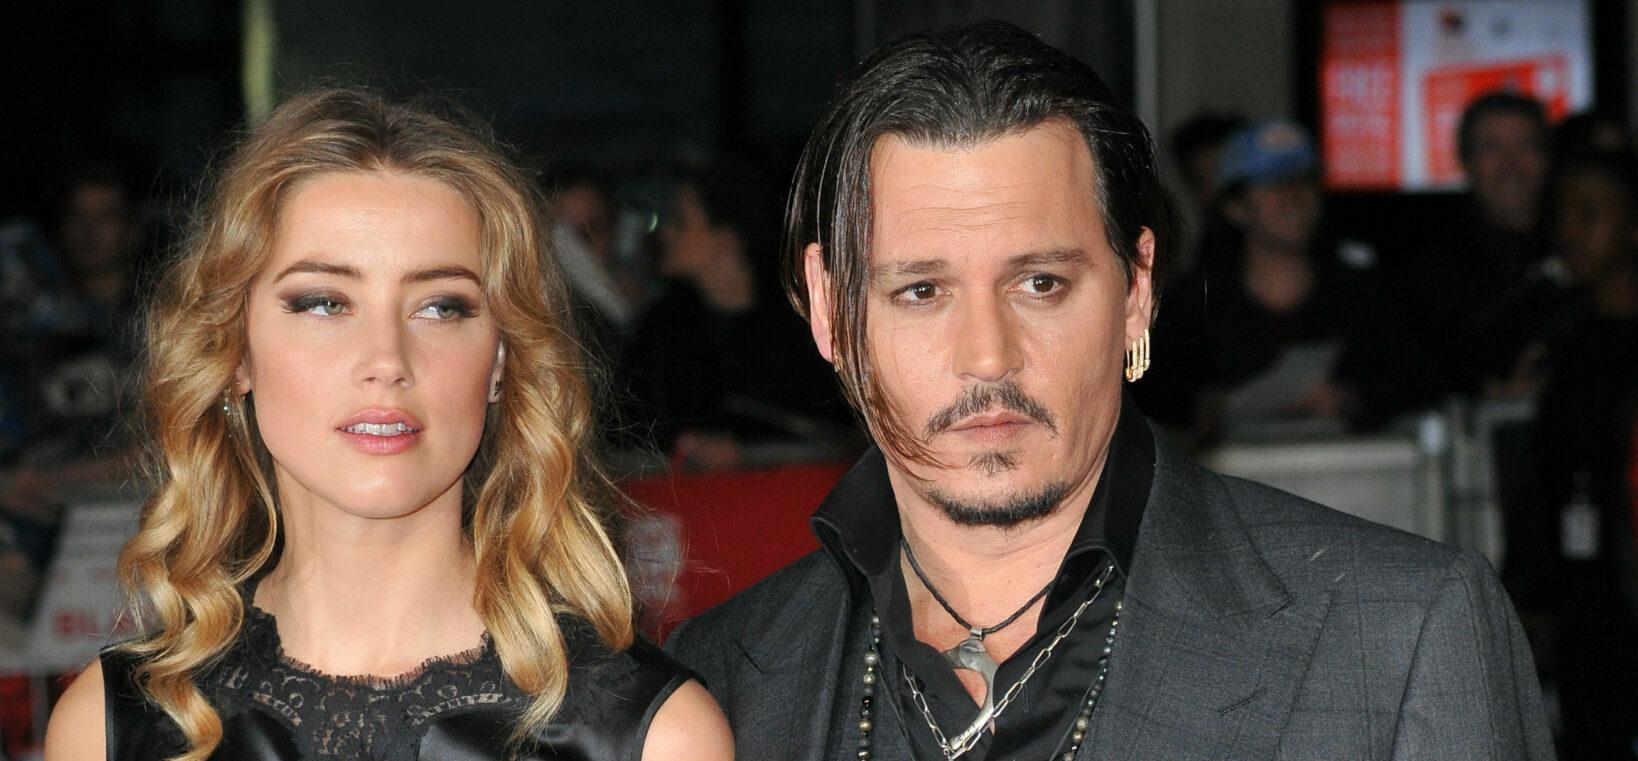 Johnny Depp’s Testimony Against Amber Heard Continues Into Day 2